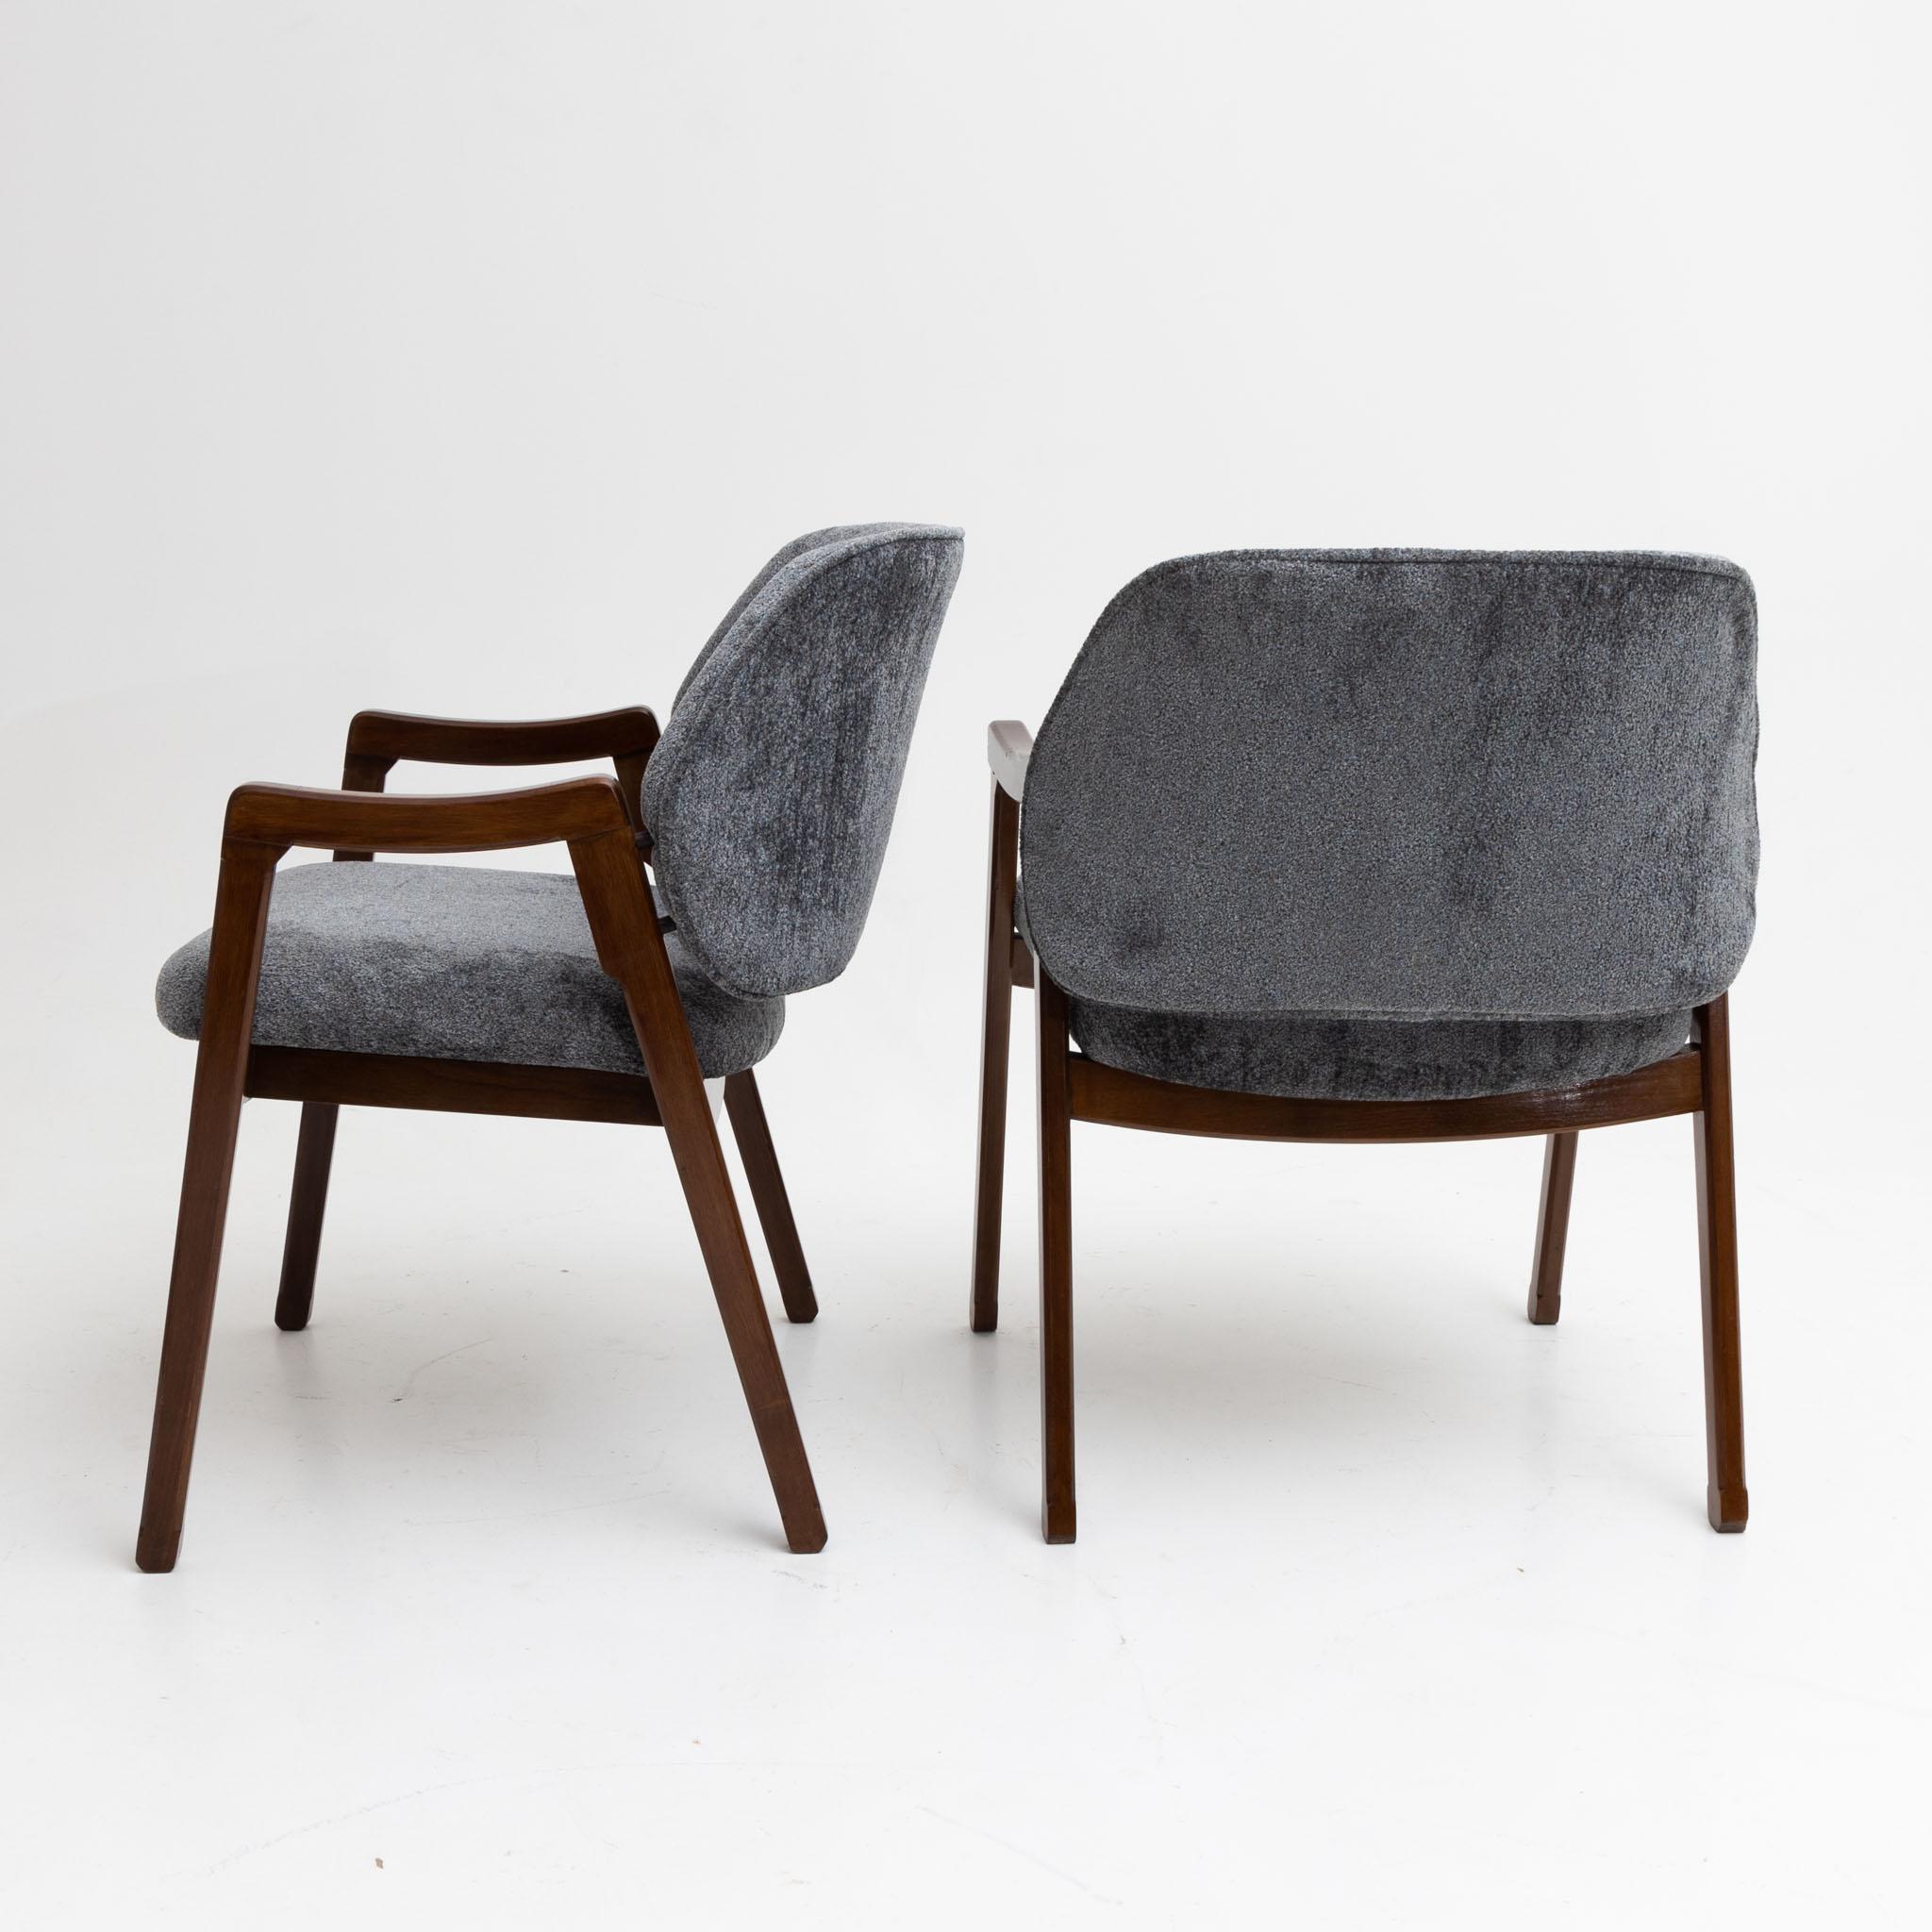 Set of Four Modernist Armchairs by Ico Parisi im Zustand „Gut“ im Angebot in New York, NY